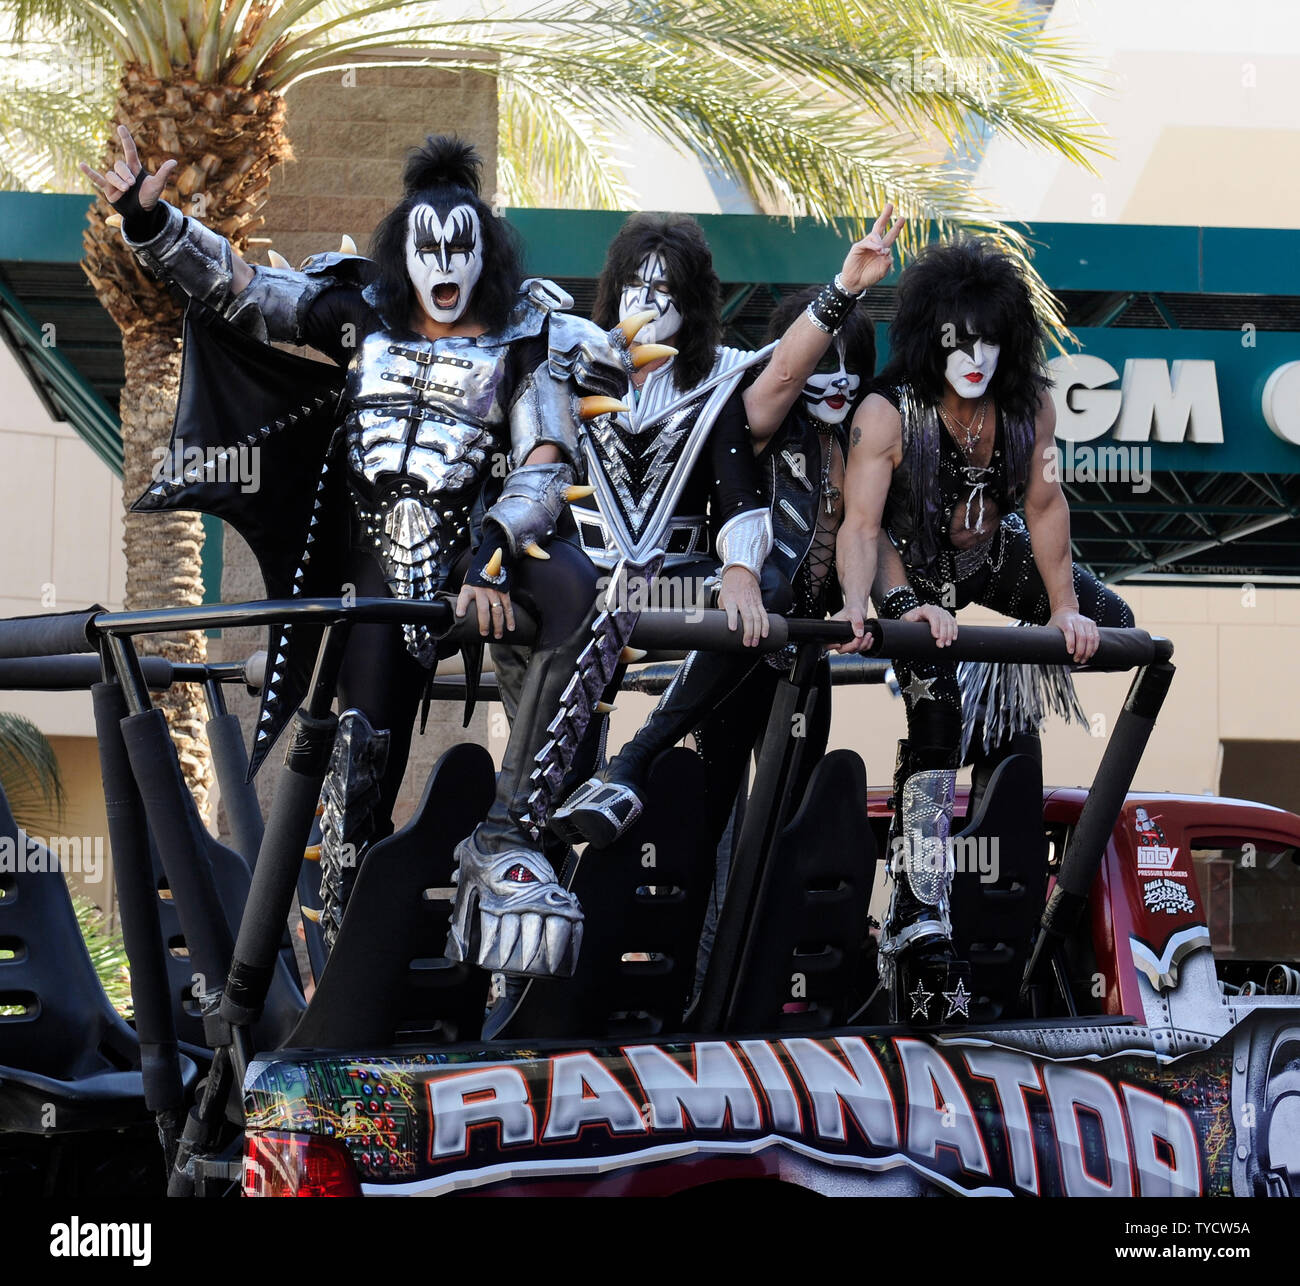 (L-R) Musicians Gene Simmons, Tommy Thayer,  Eric Singer and Paul Stanley of the band KISS arrive at the 47th annual Academy of Country Music Awards at the MGM Hotel in Las Vegas, Nevada on April 1, 2012.  UPI/David Becker Stock Photo